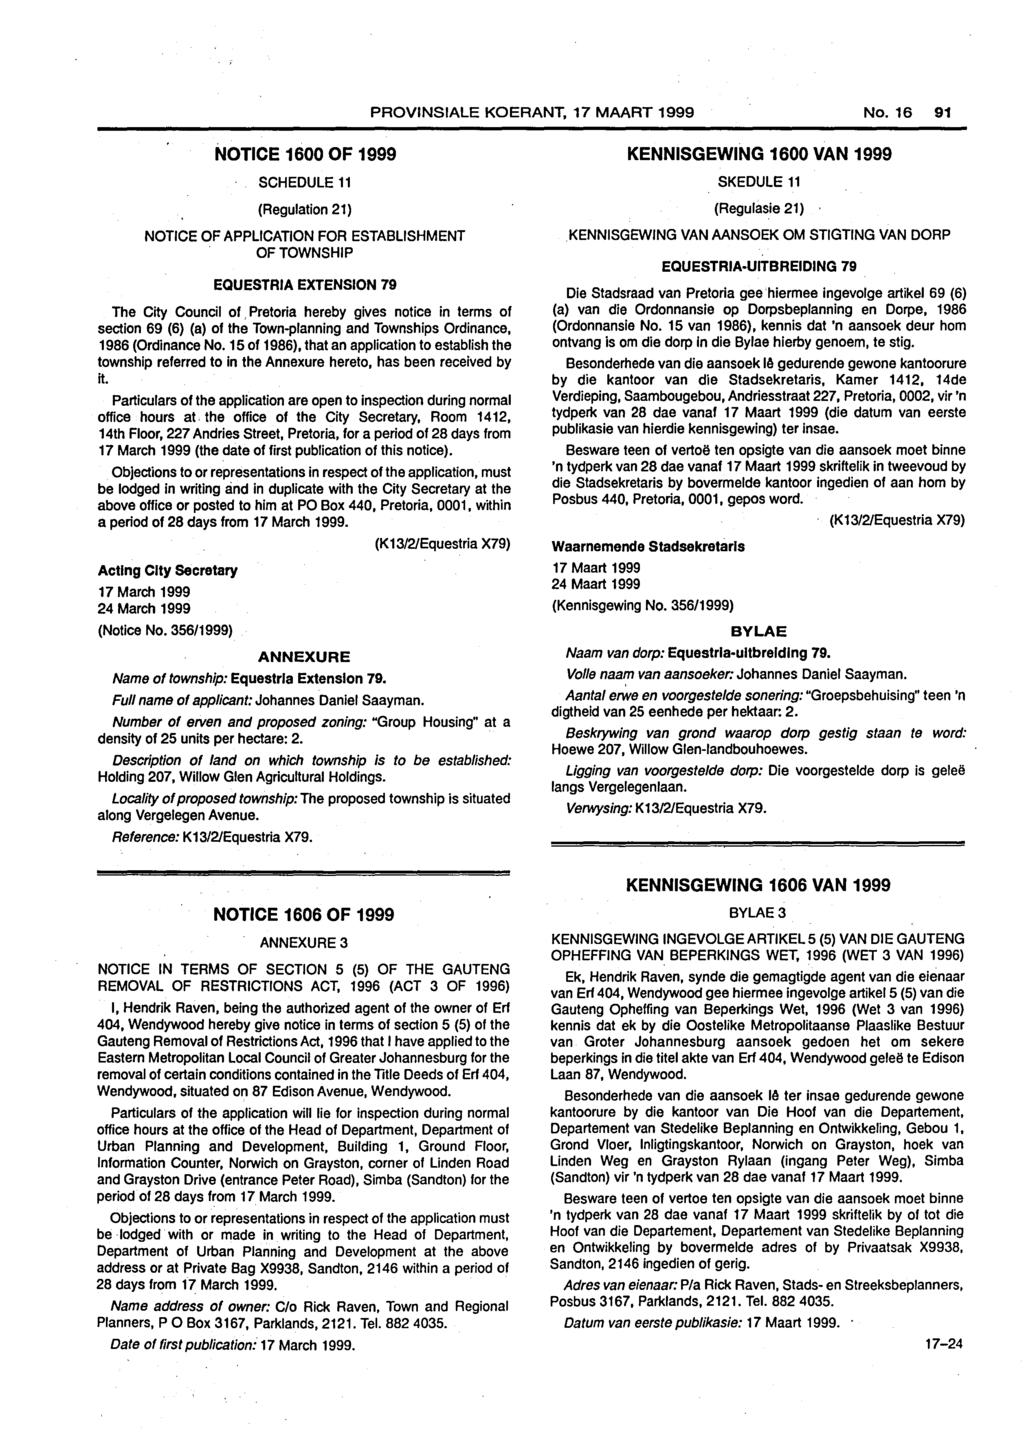 PROVINSIALE KOERANT, 17 MAART 1999 No. 16 91 NOTICE 1600 OF 1999 SCHEDULE 11 (Regulation 21) NOTICE OF APPLICATION FOR ESTABLISHMENT OF TOWNSHIP EQUESTRIA EXTENSION 79 The City Council of.